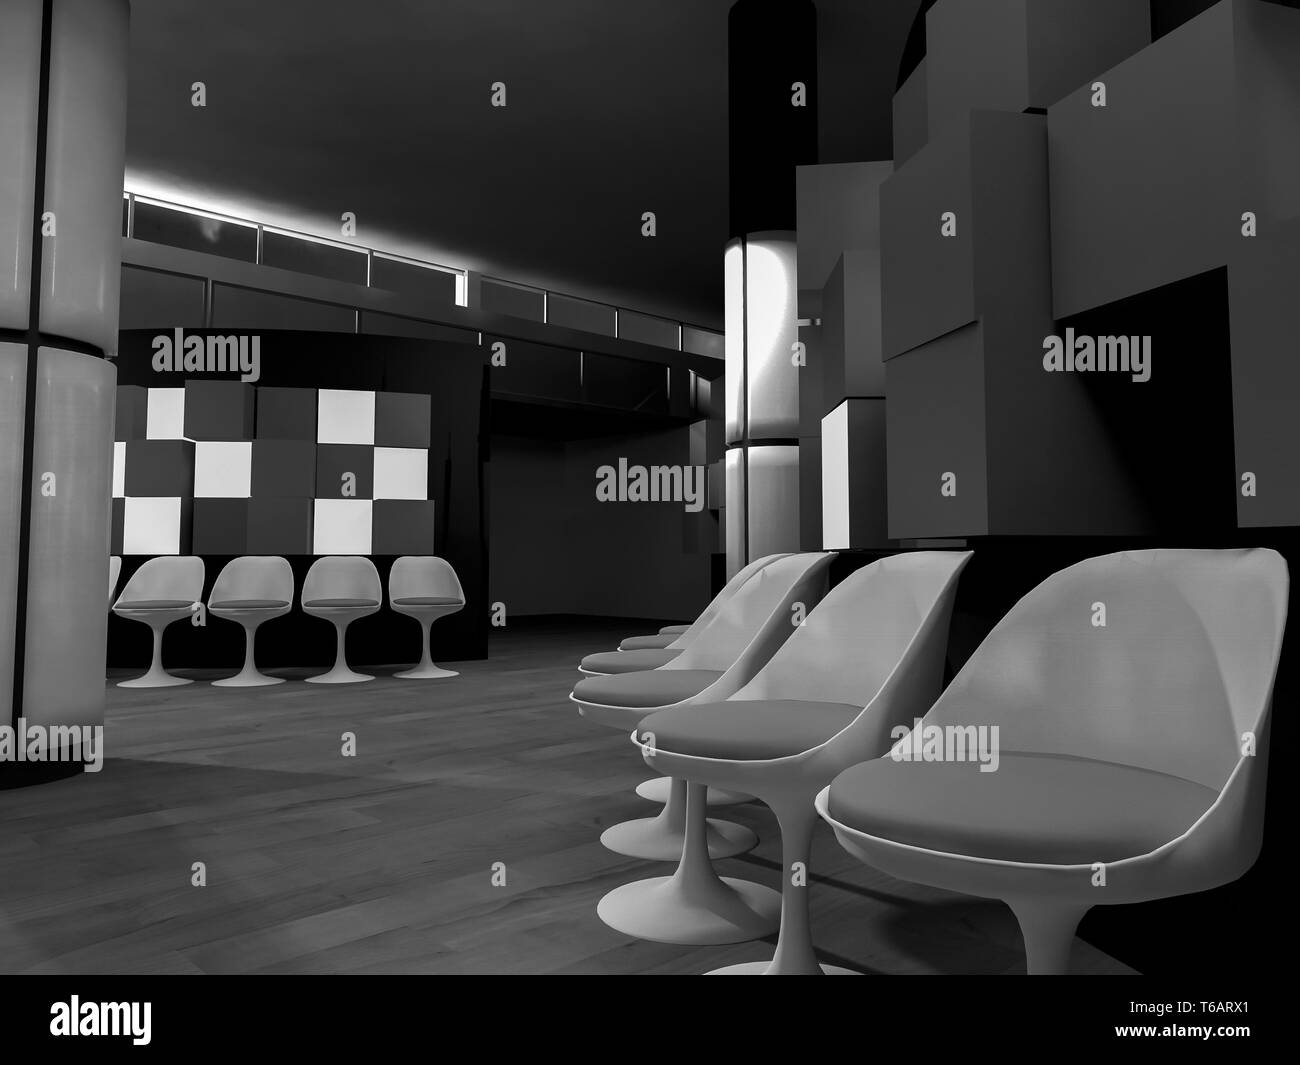 Waiting Room With Chairs In Hospital Clean Room With Shapes In 3d